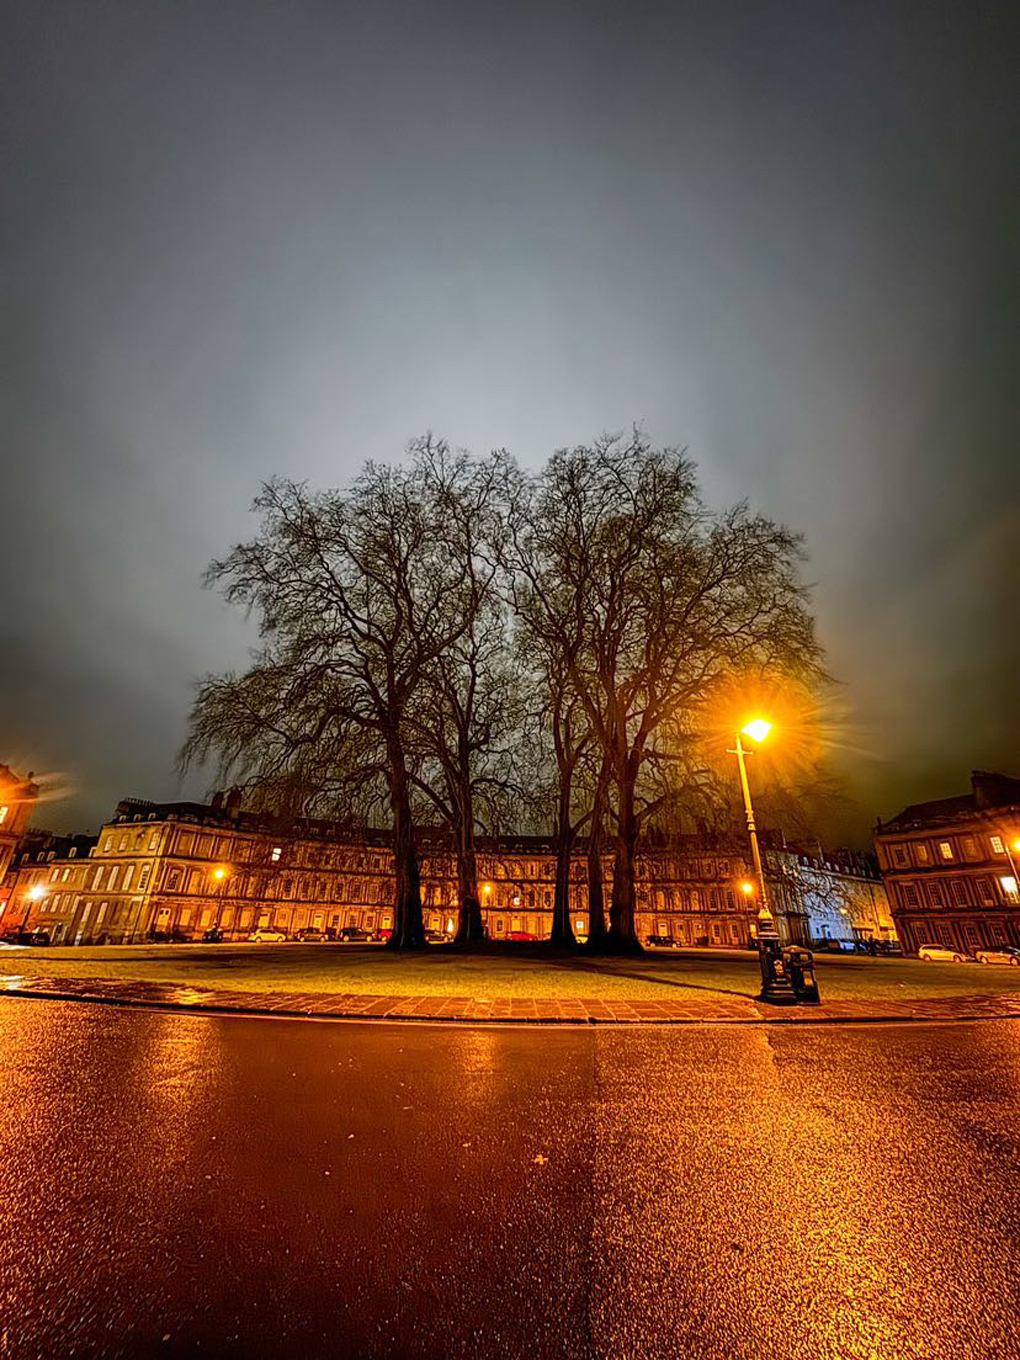 The silhouette of two tall, skeletal trees in a small park in front of buildings, backlit by a full moon heavily diffused by dense cloud cover